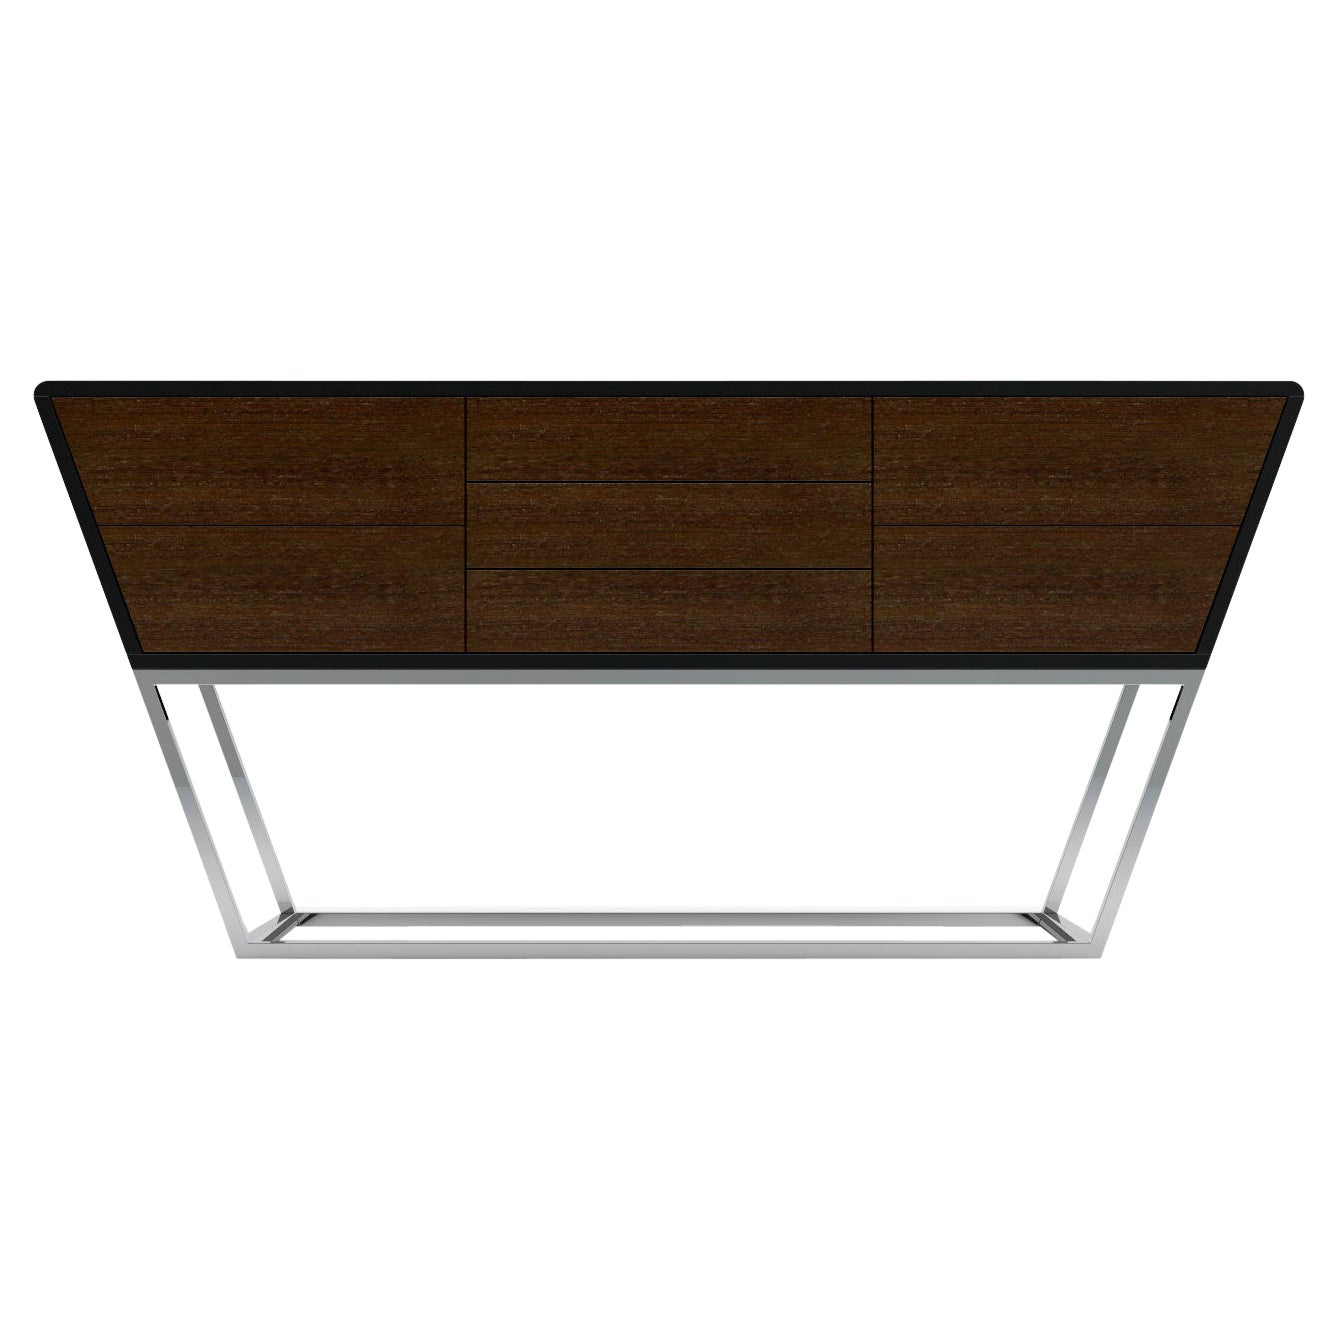 Obsidian Sideboard - Modern Black Lacquered Sideboard with Stainless Steel Base